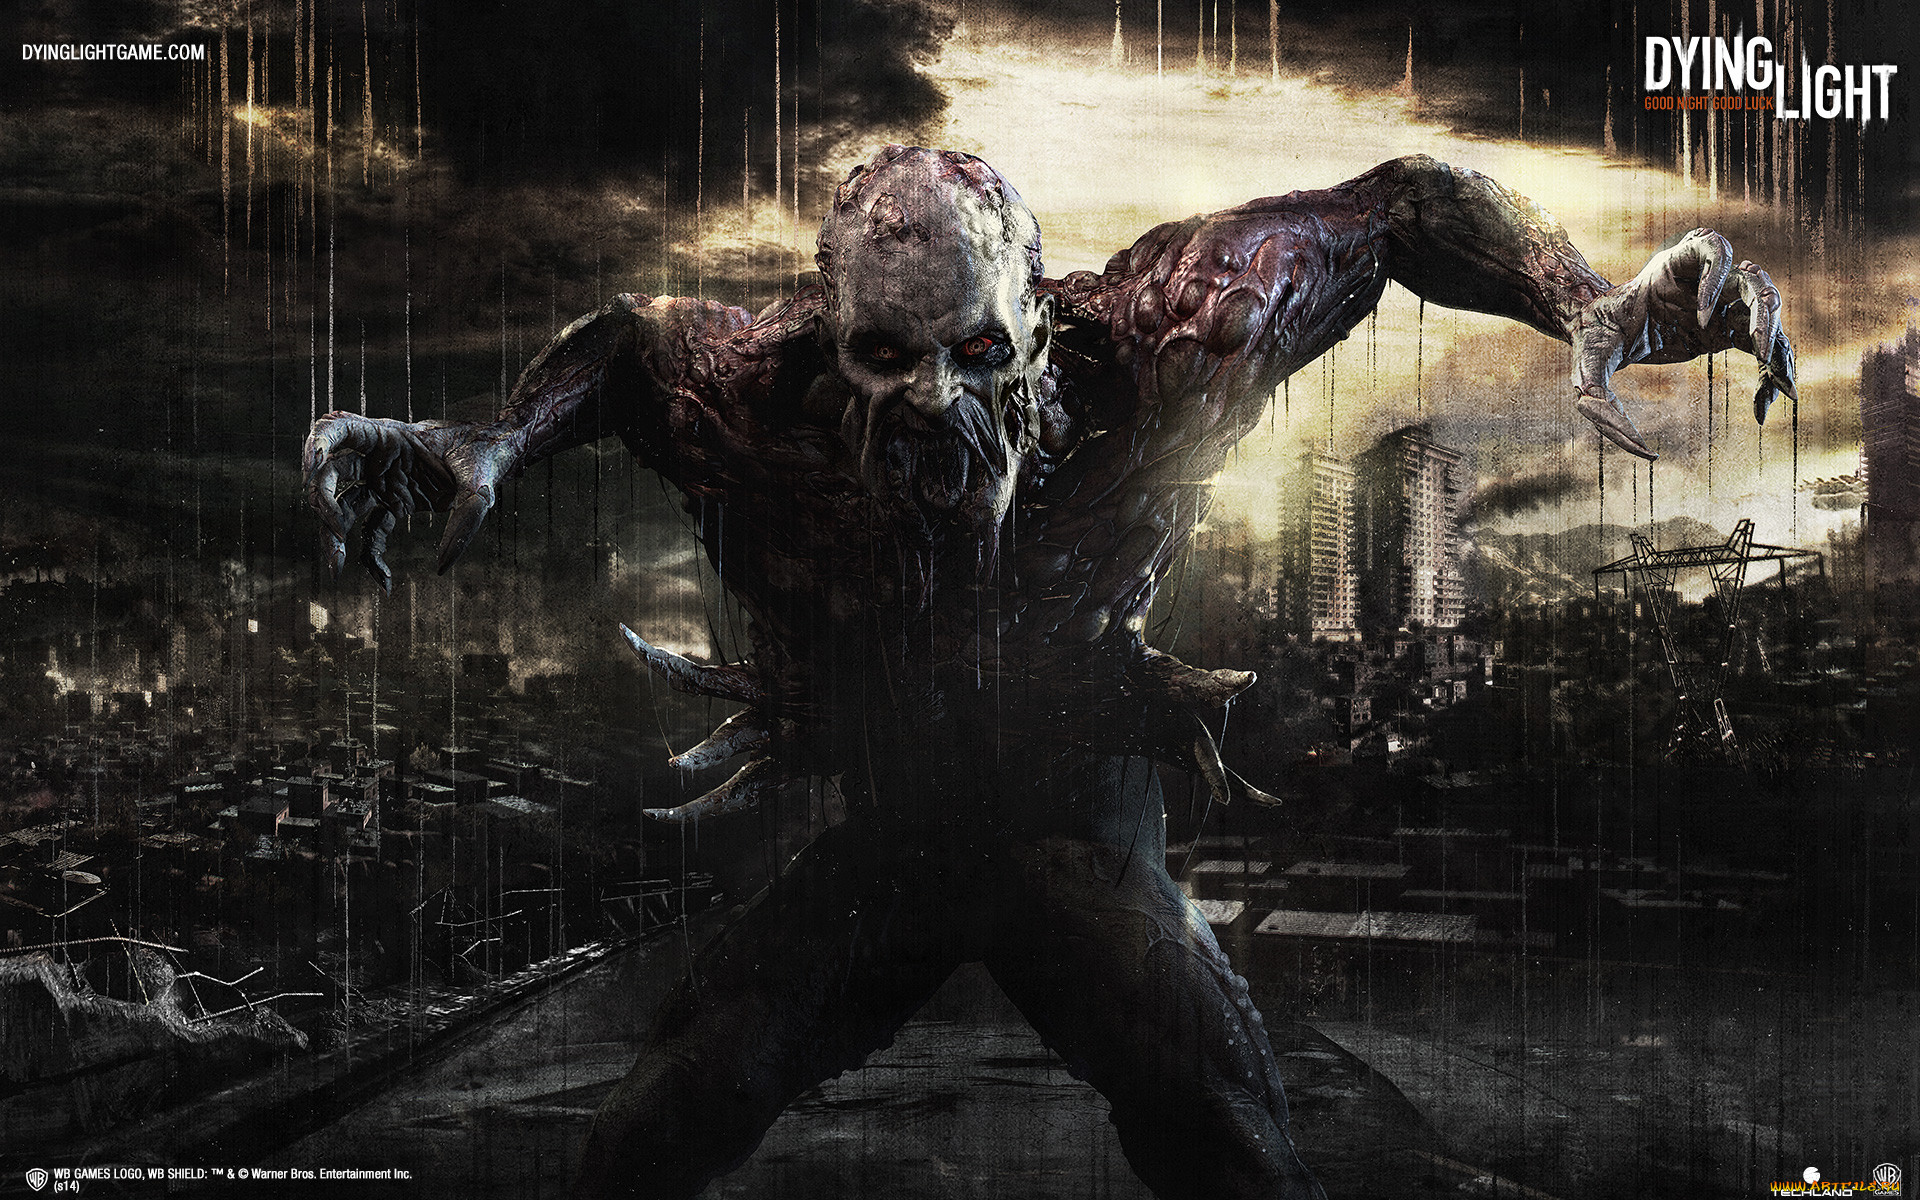  , dying light, horror, survival, action, , dying, light